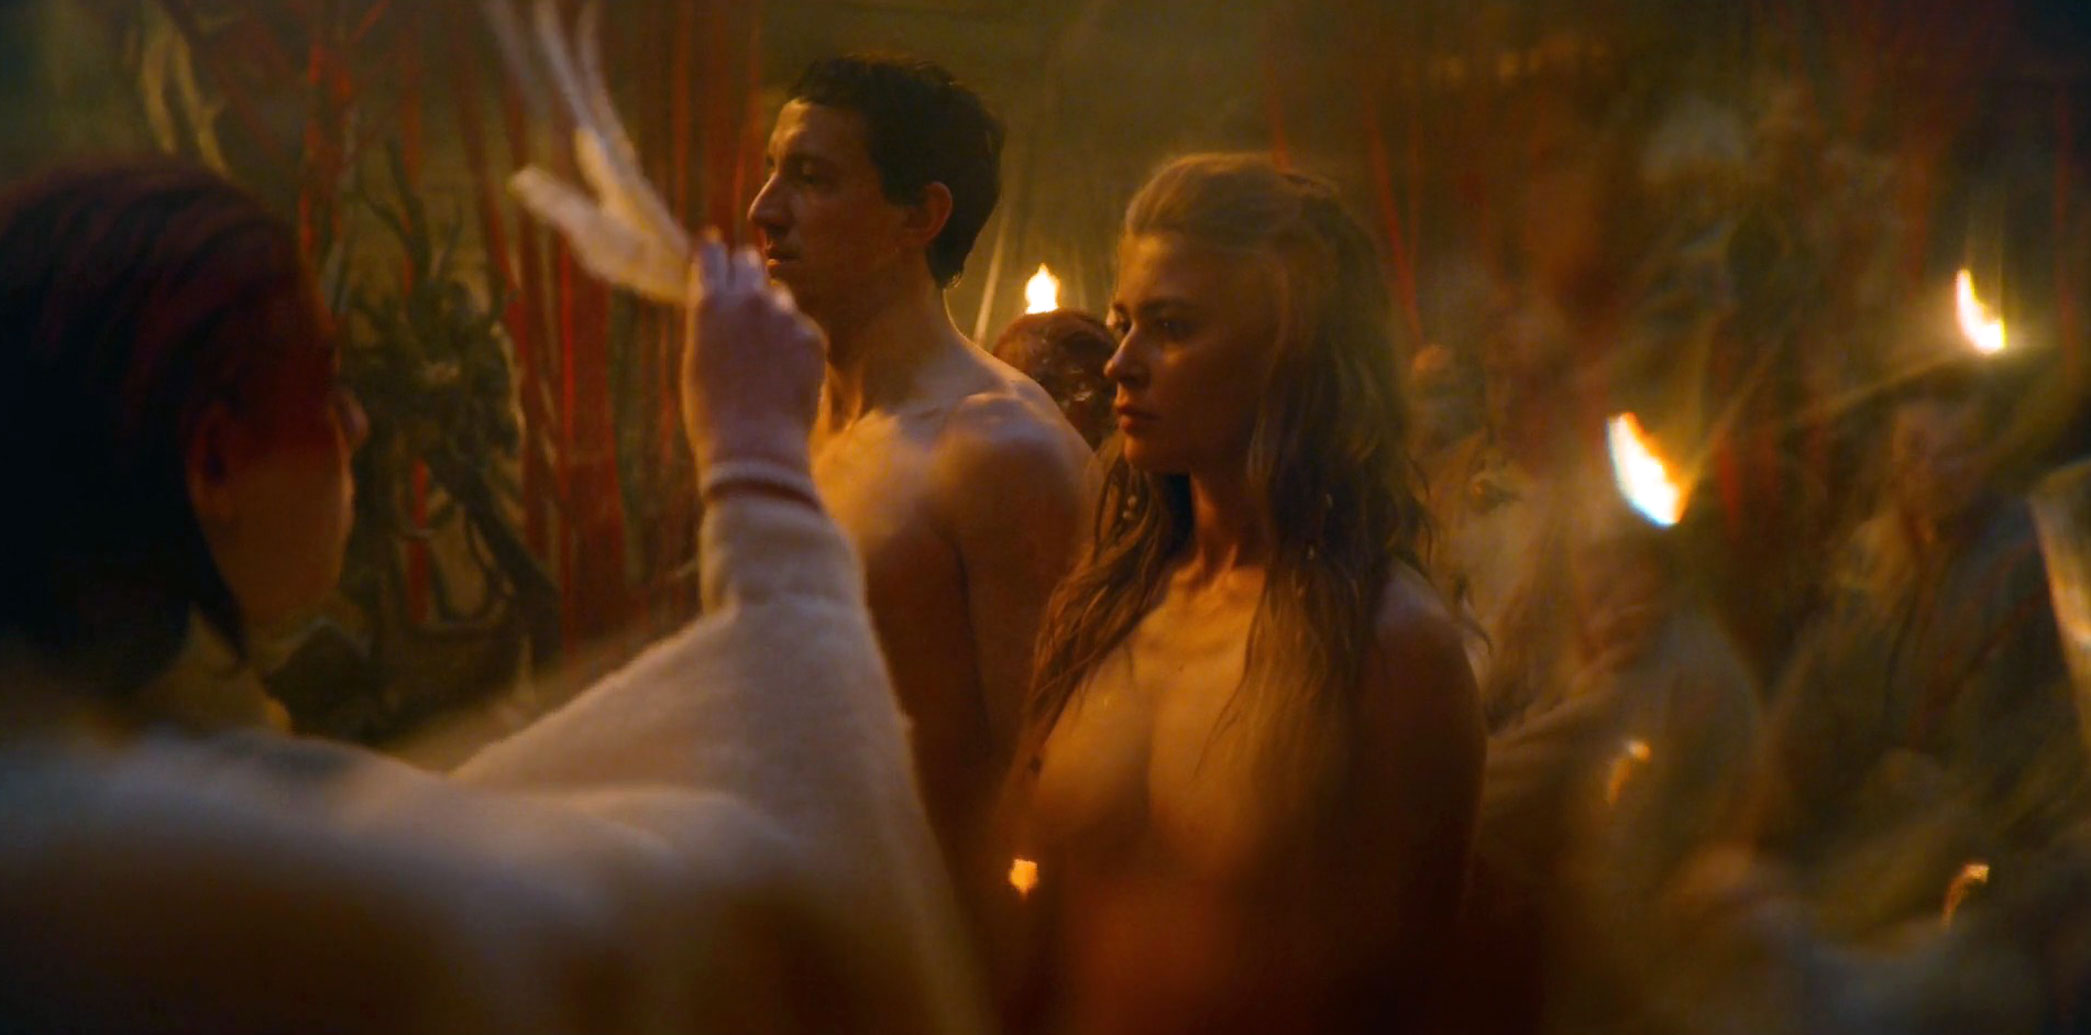 We see Jeanne Goursaud standing topless beside a man in this scene. 